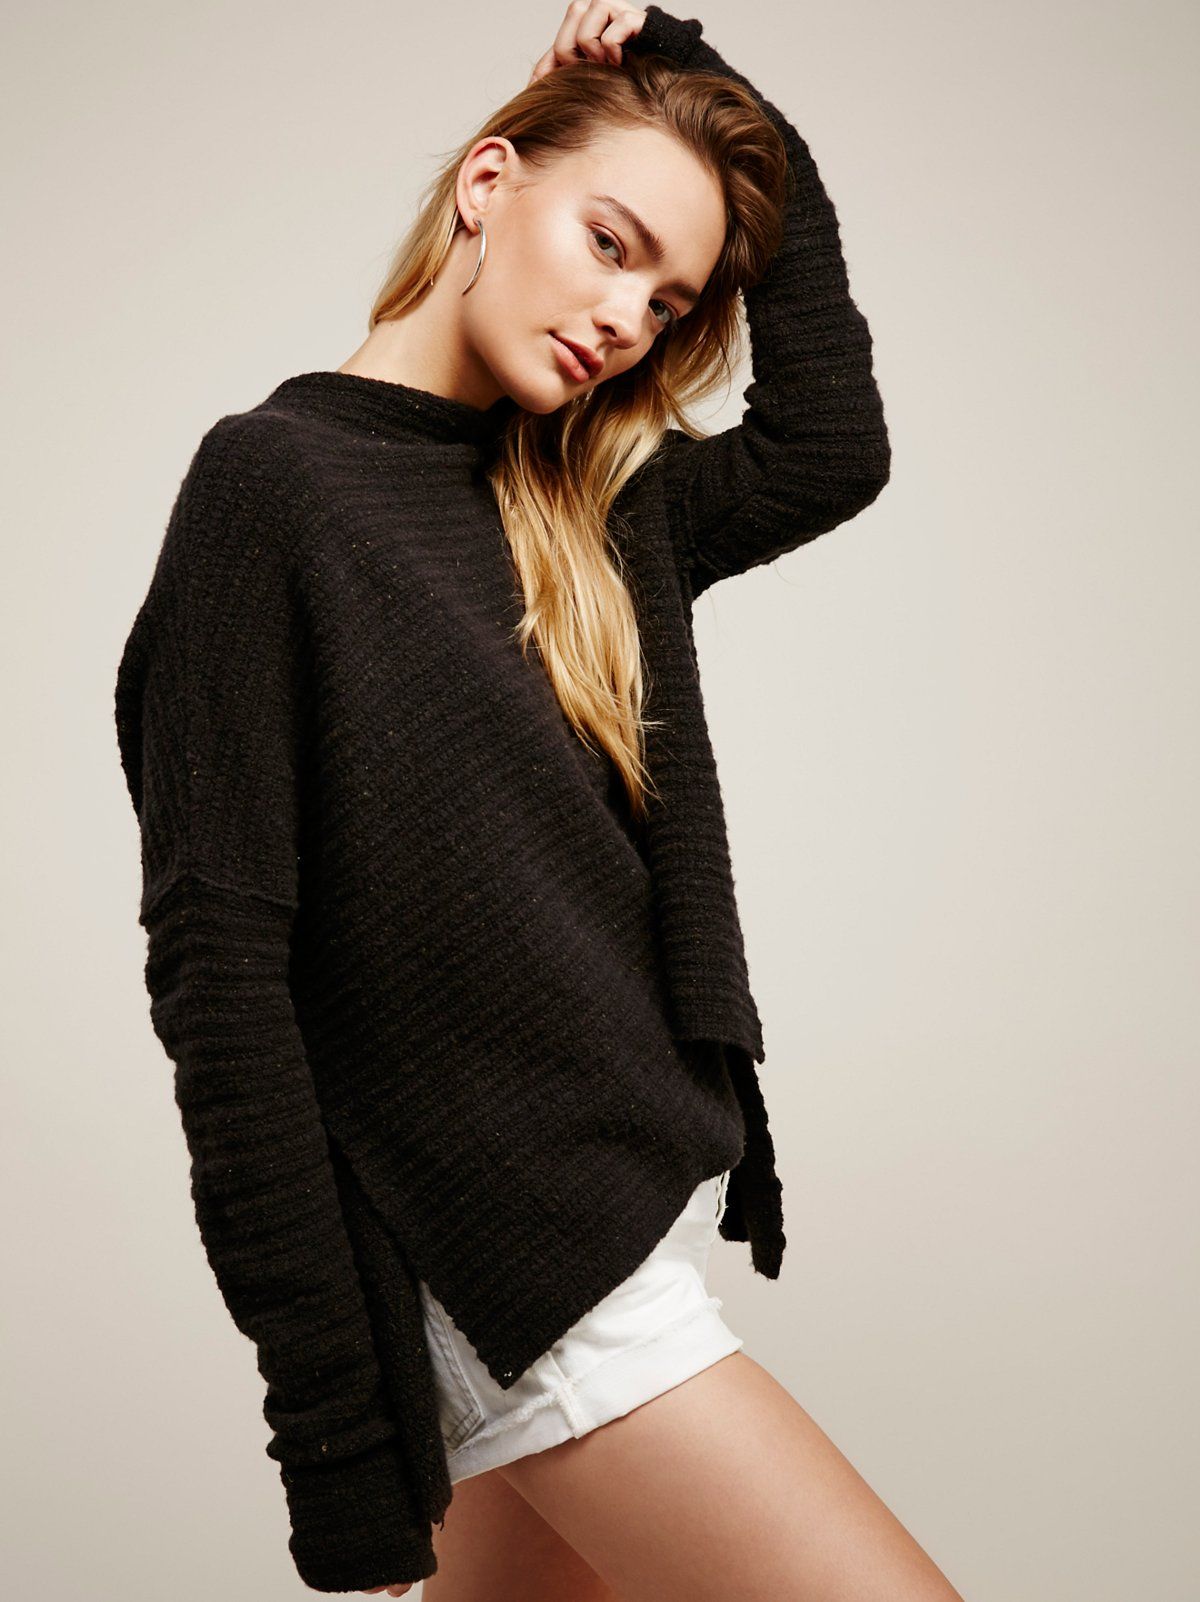 https://www.freepeople.com/shop/arctic-fox-sweater-/?color=001 | Free People